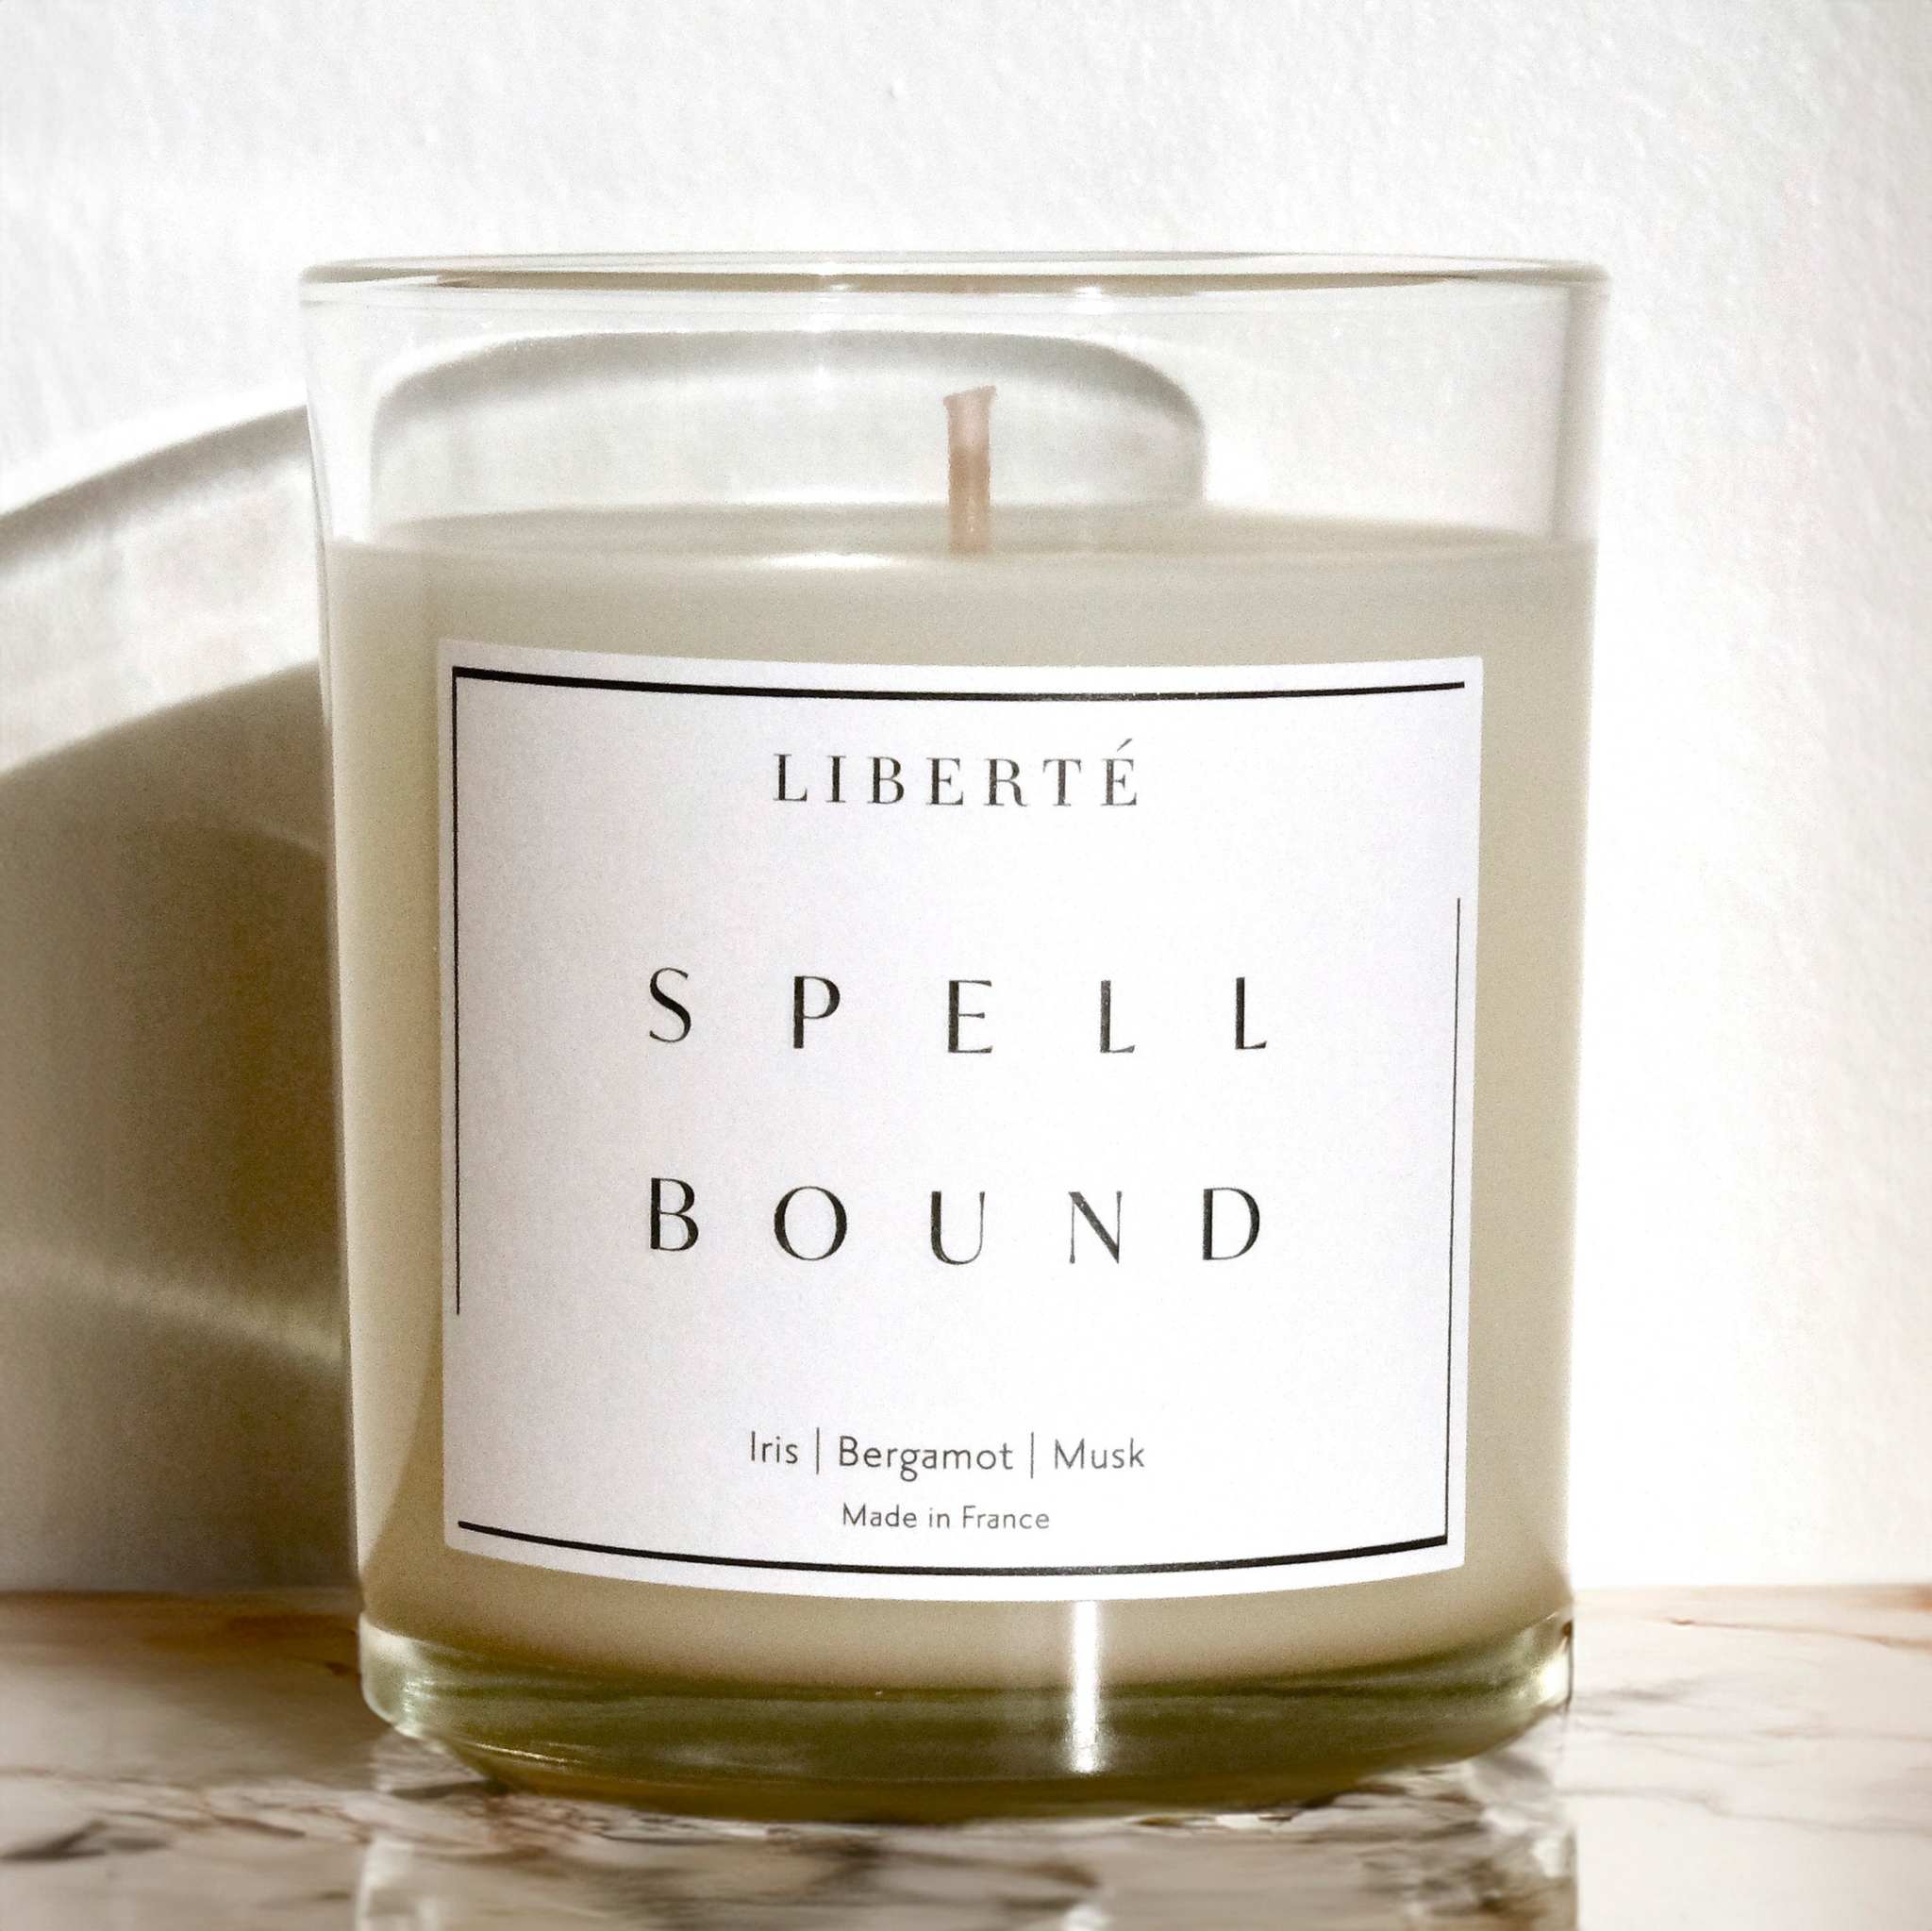 Spell BoundSpell Bound by Liberté is hand-crafted in Grasse, France. With notes of Iris, Bergamot and Musk, this seductive and alluring scent is the perfect way to ignite your Spell Bound